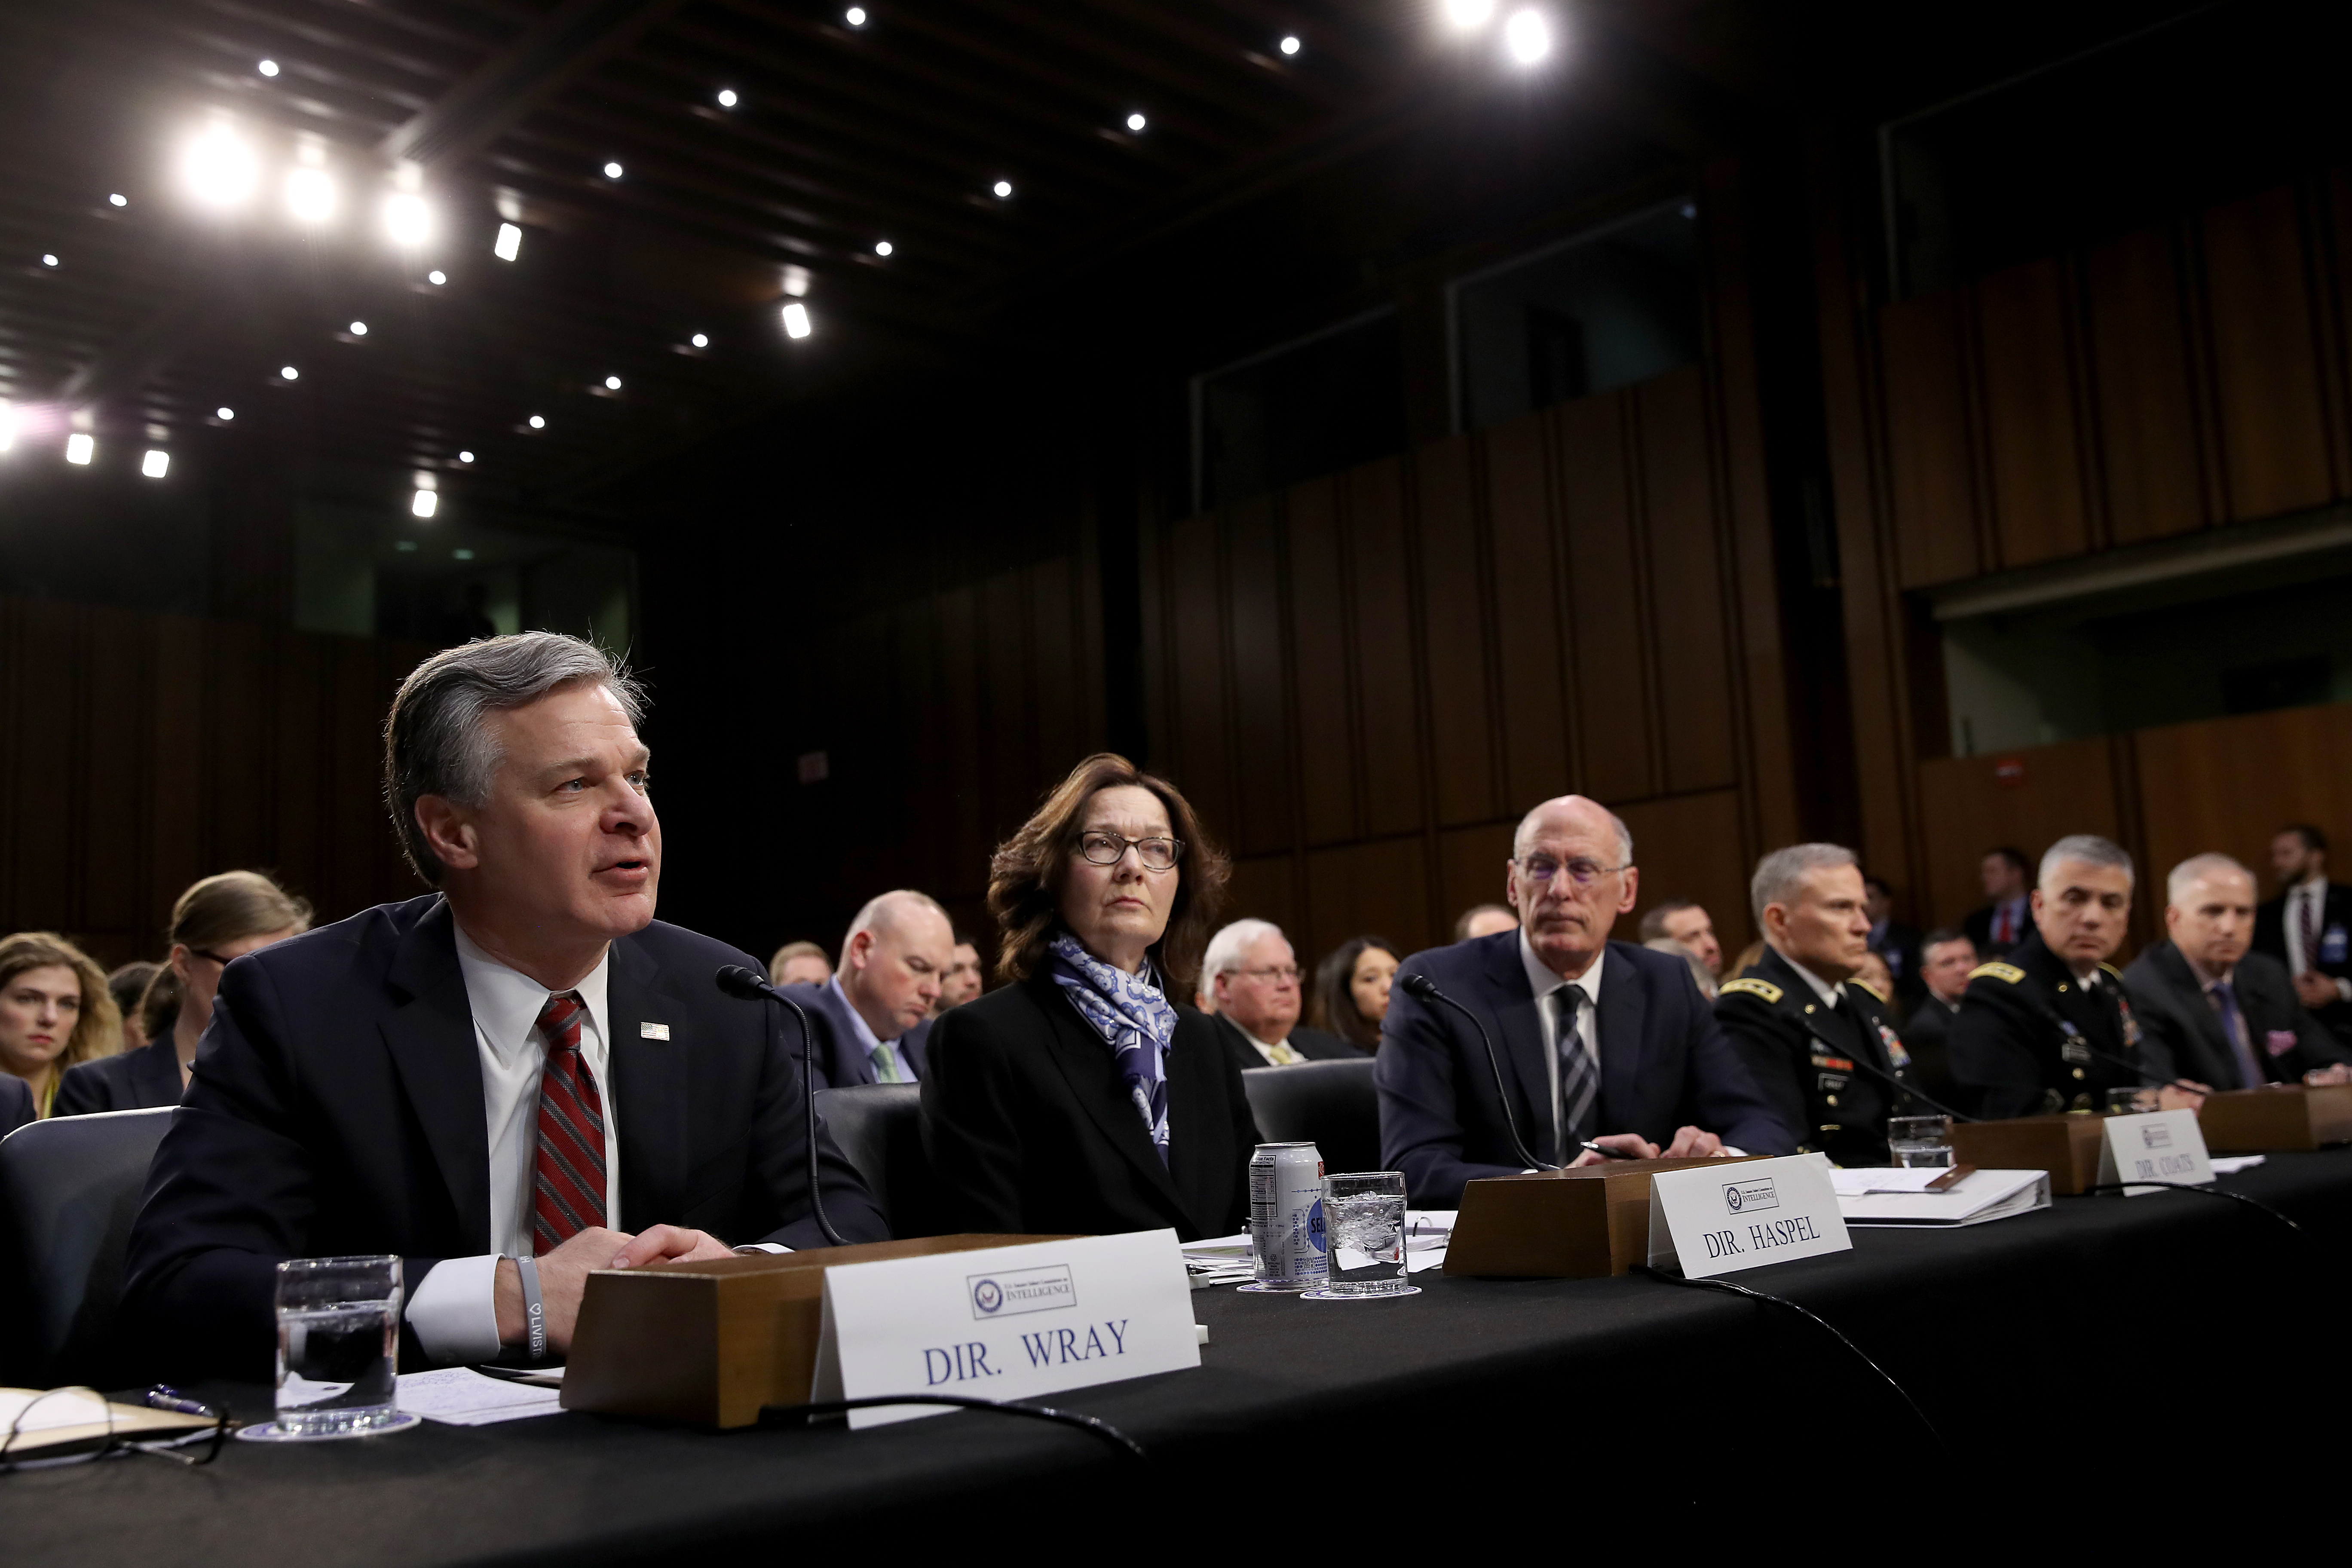 (L-R) FBI Director Christopher Wray; CIA Director Gina Haspel; Director of National Intelligence Dan Coats; Gen. Robert Ashley, director of the Defense Intelligence Agency; Gen. Paul Nakasone, director of the National Security Agency; and Robert Cardillo, director of the National Geospatial-Intelligence Agency await testify at a Senate Intelligence Committee hearing on "Worldwide Threats" January 29, 2019 in Washington, DC. (Photo by Win McNamee/Getty Images)